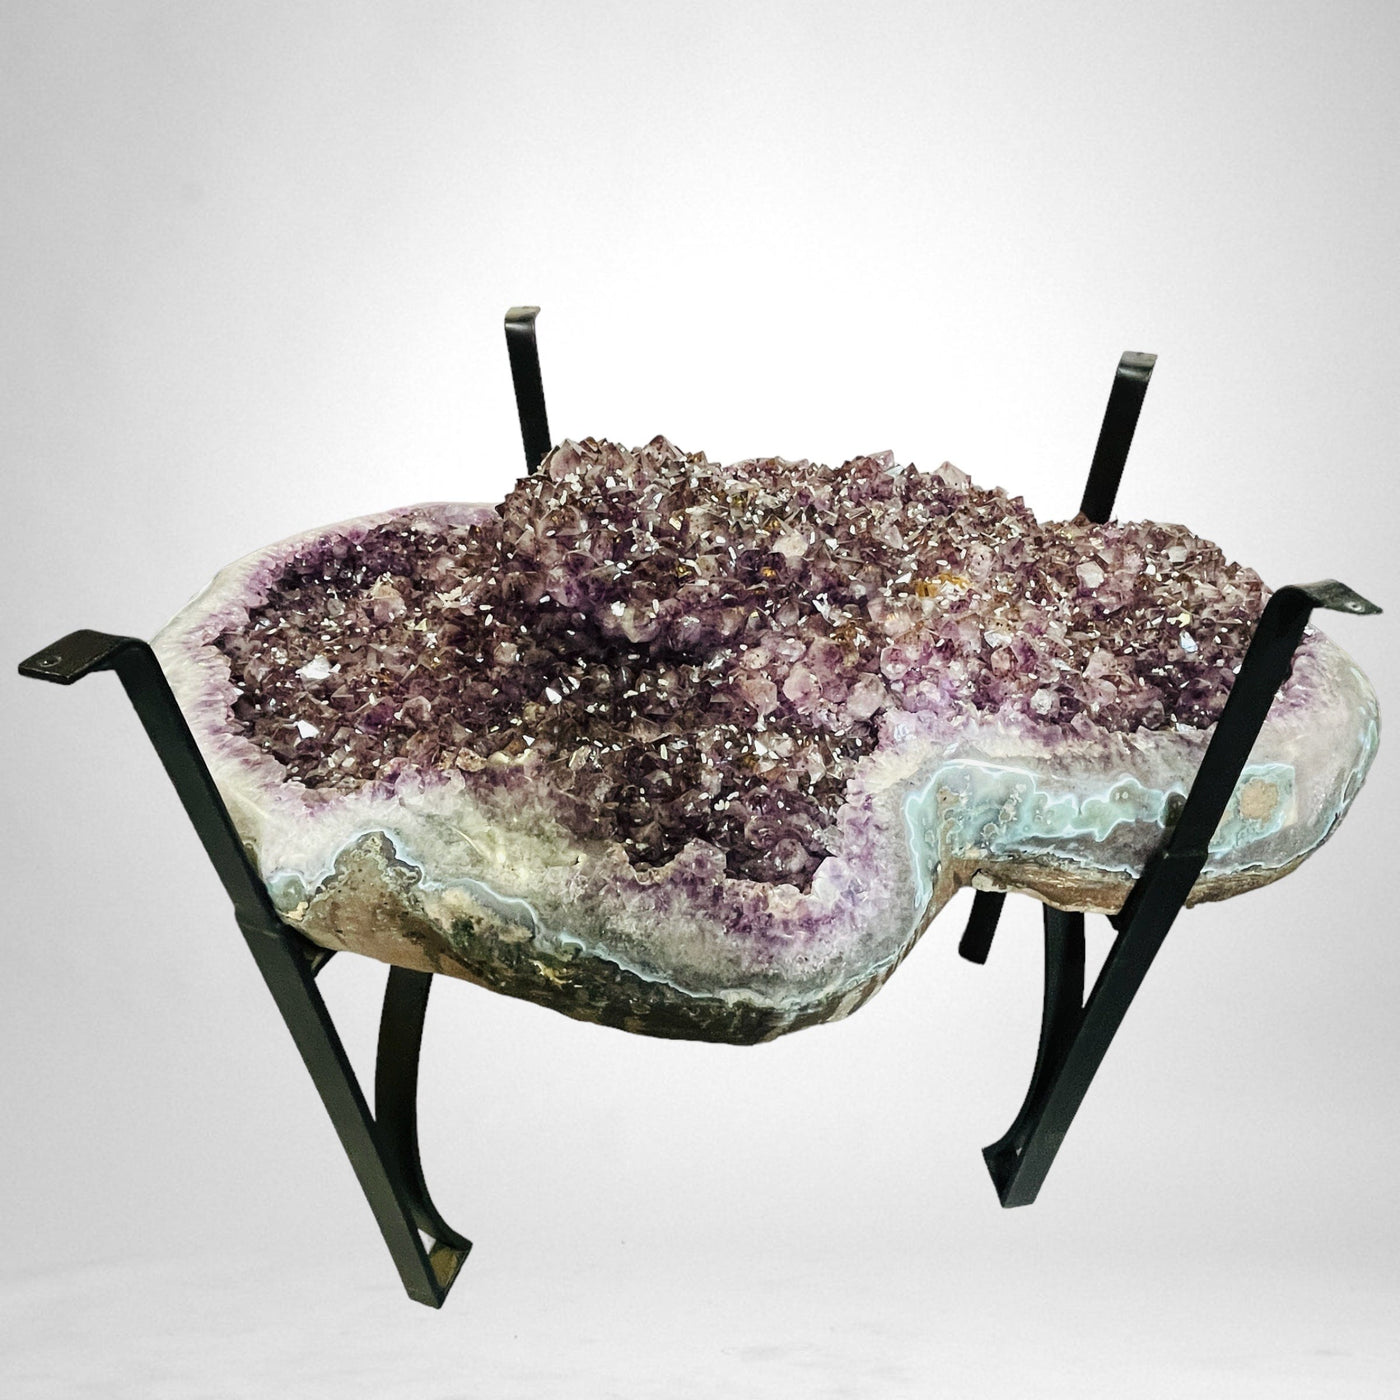 Amethyst Crystal Cluster Geode Table on Metal Base on white background